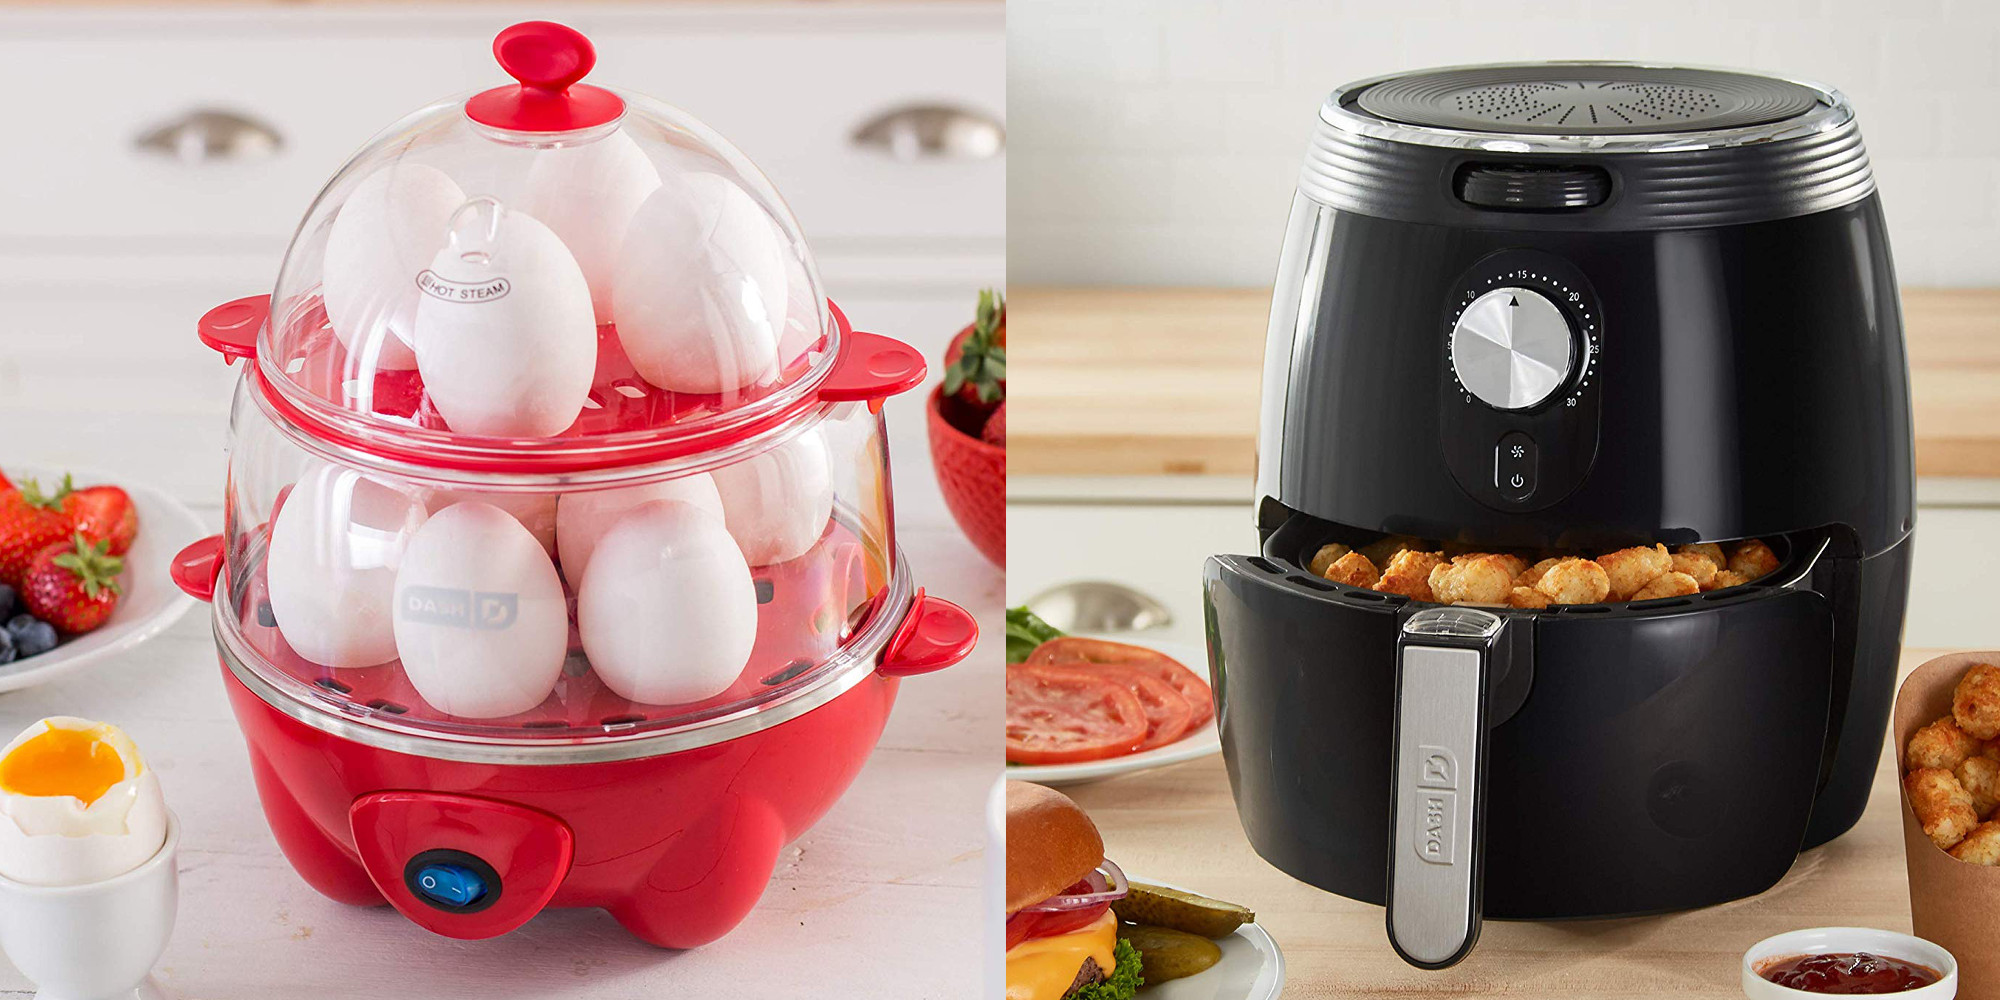 DASH Deluxe Electric Egg Cooker with 12 Egg Capacity in Black